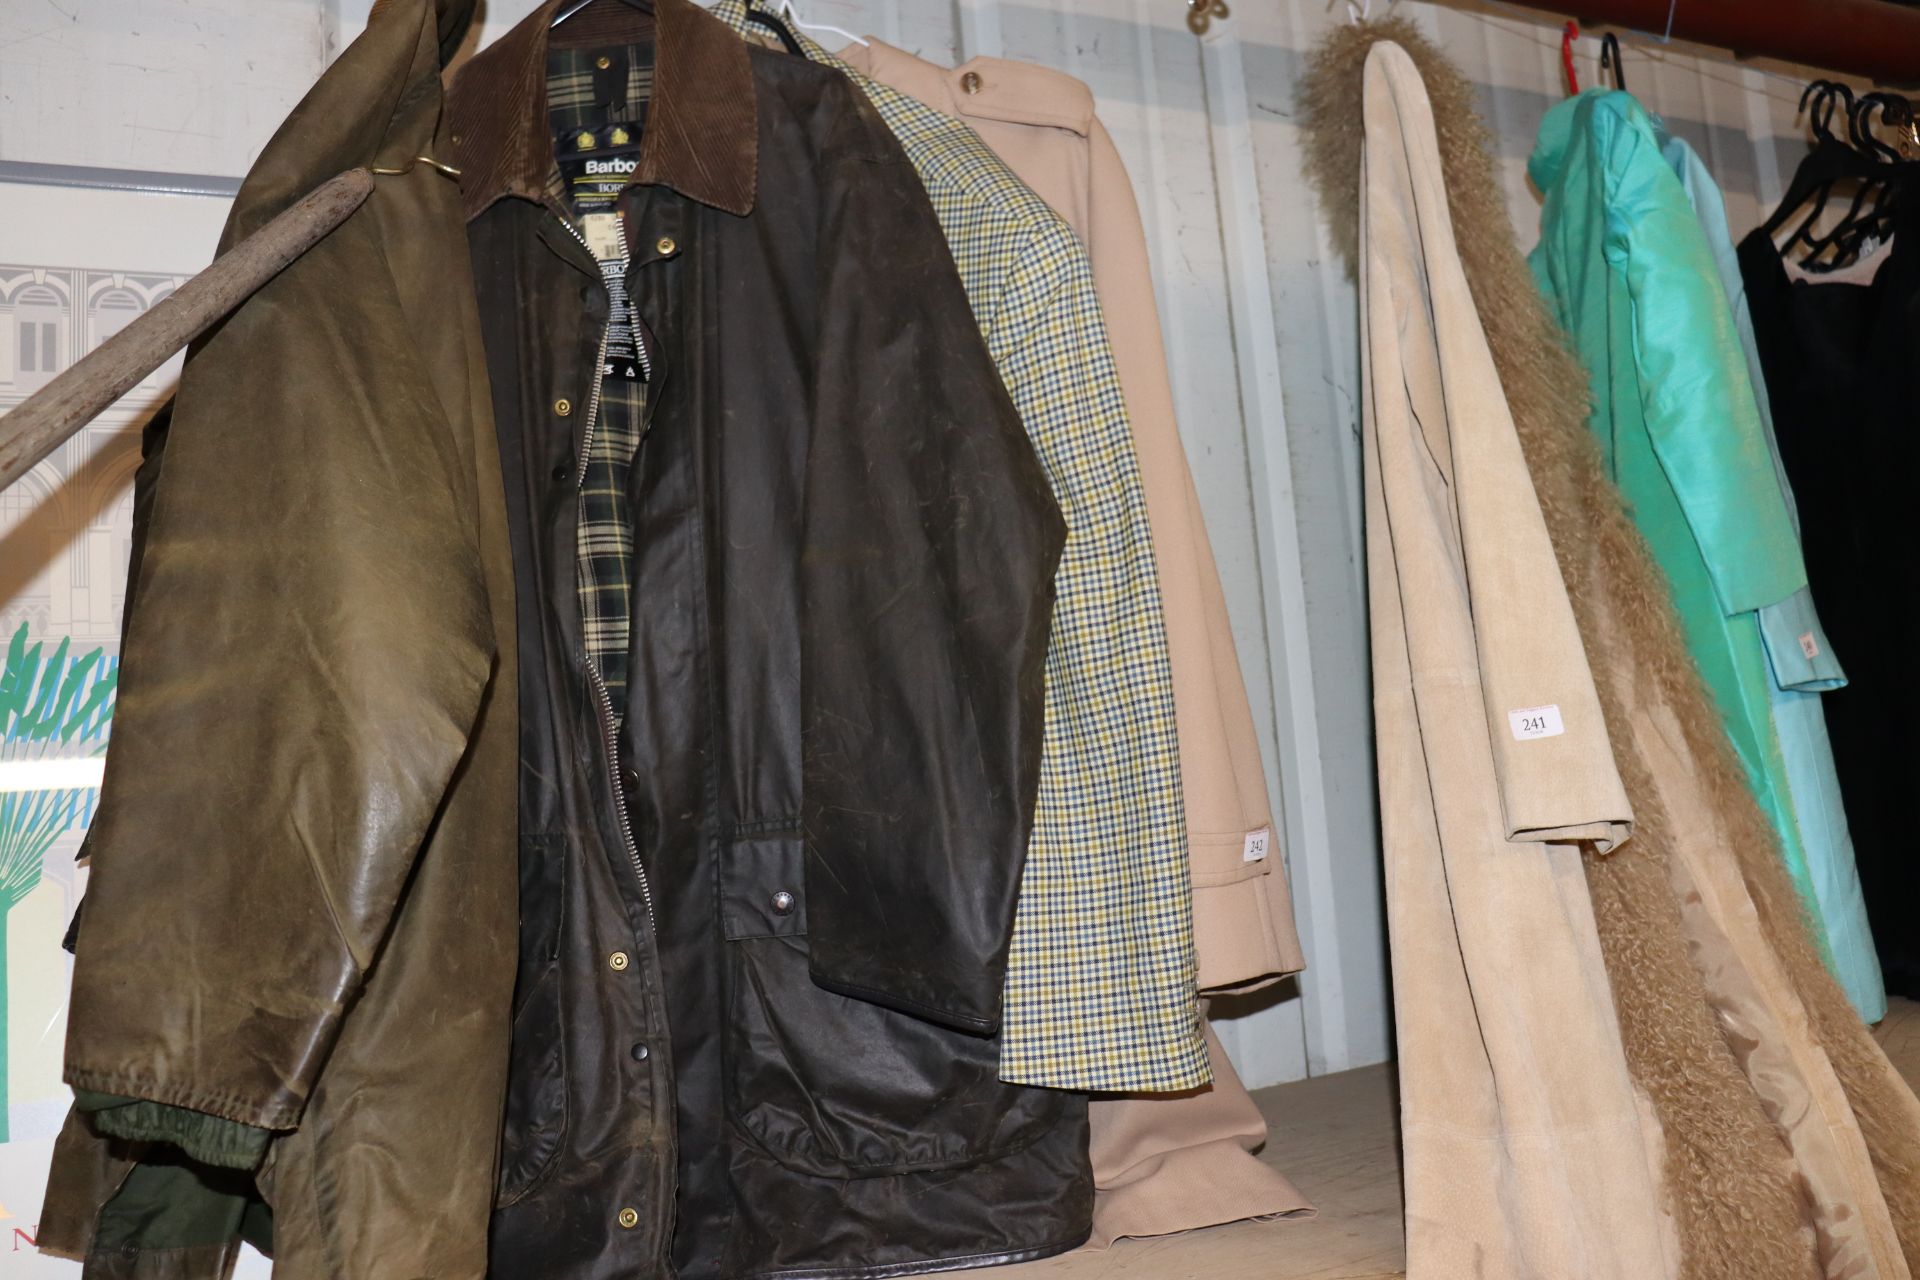 Four items of men's clothing Burberry, Barbour wax - Image 4 of 6